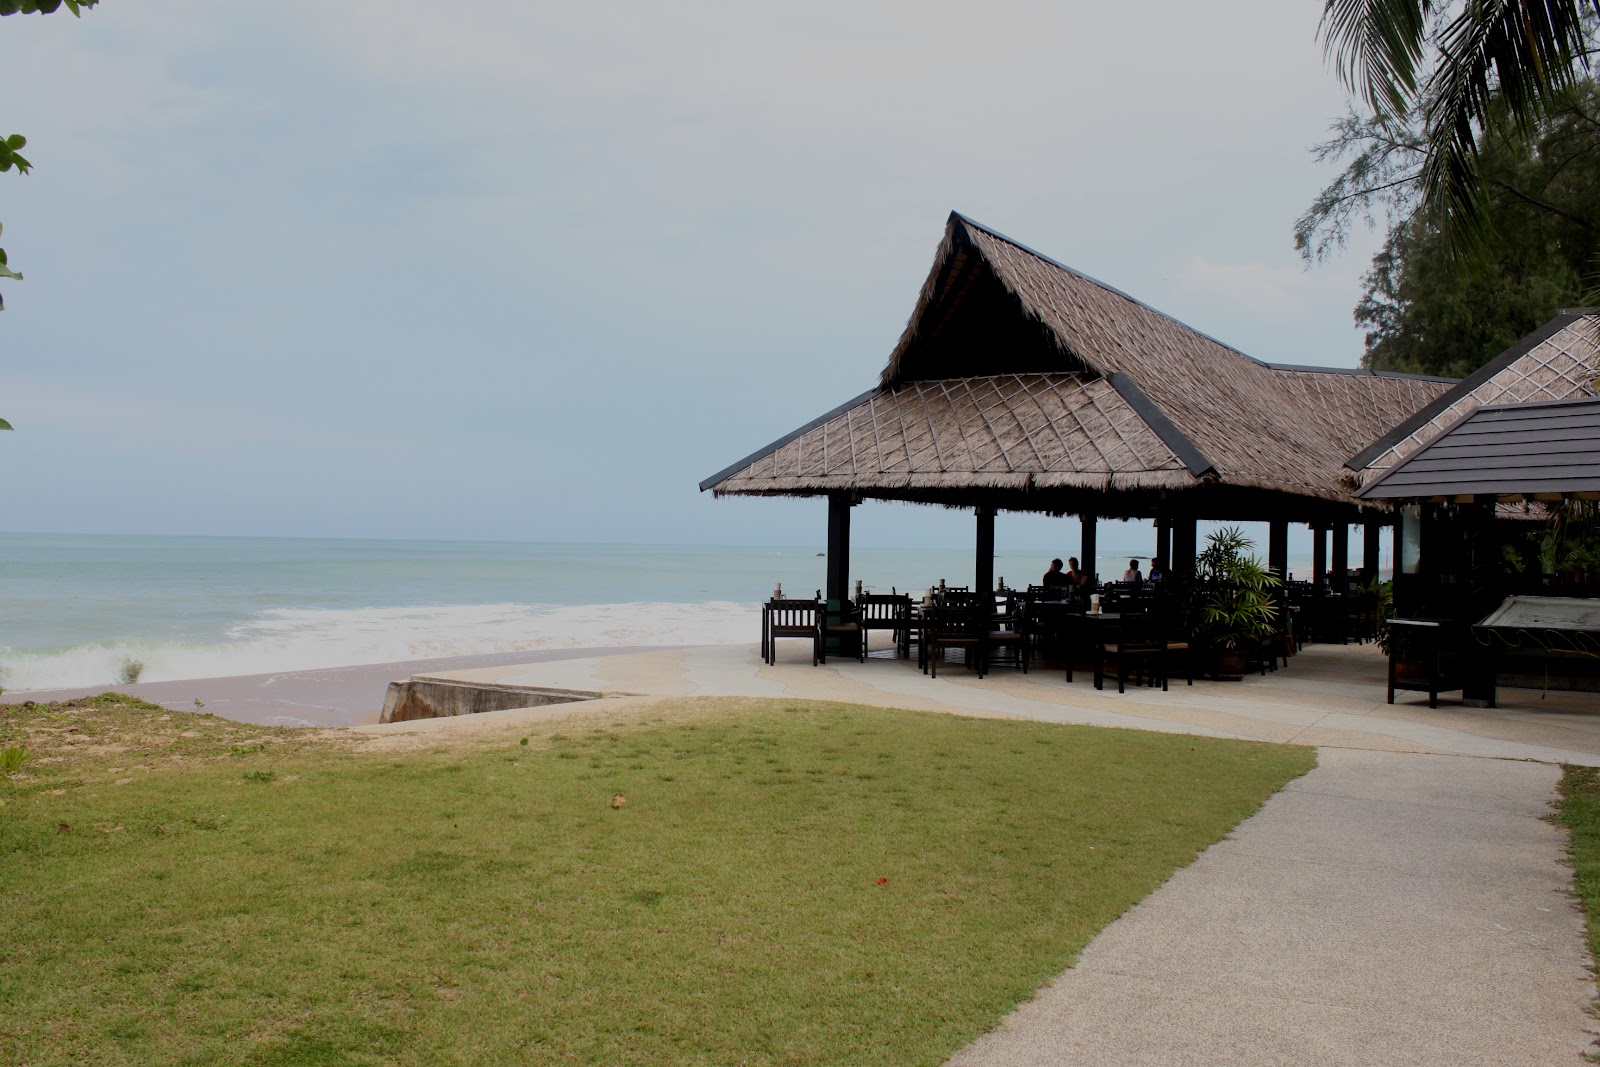 The sea facing restaurant is located along the beach.